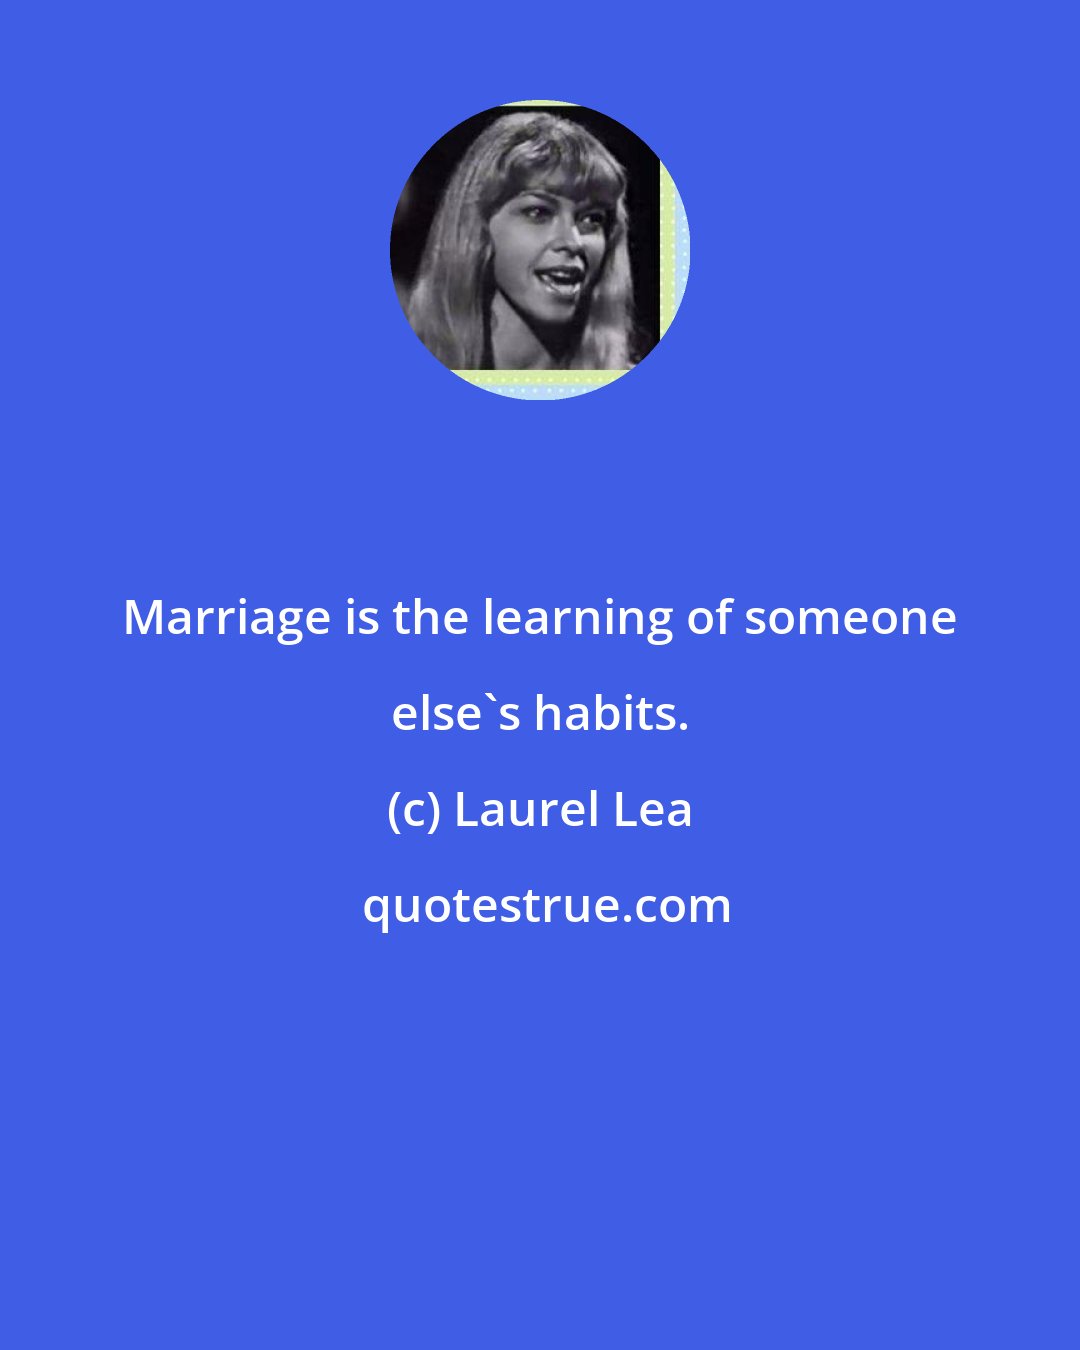 Laurel Lea: Marriage is the learning of someone else's habits.